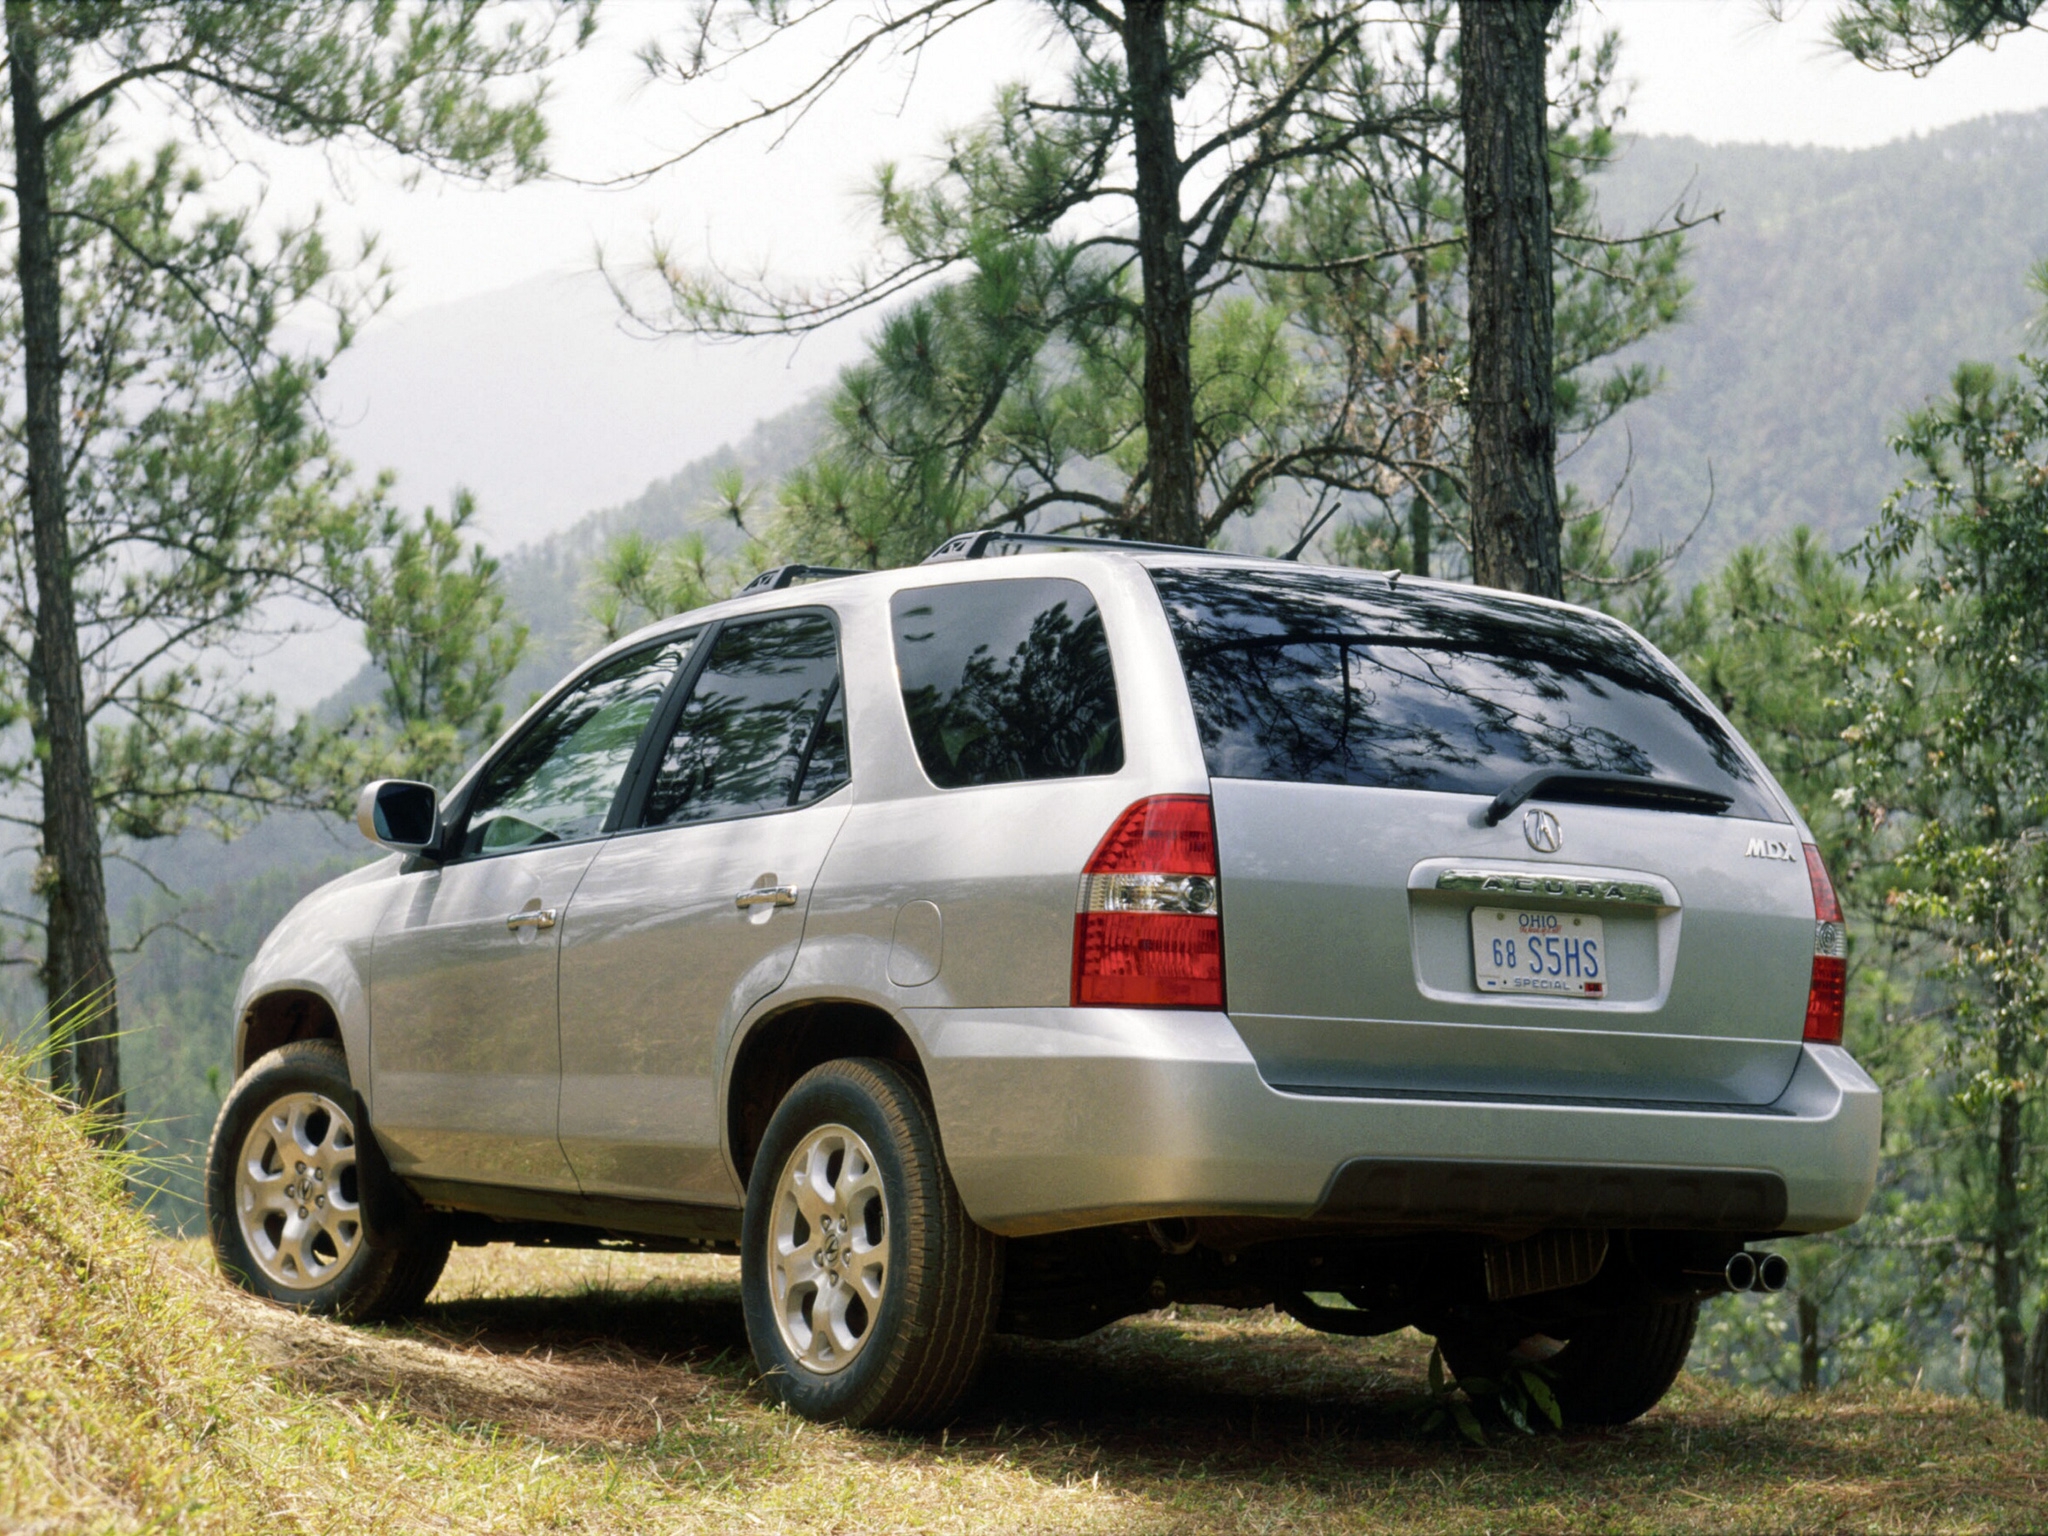 Download background auto, nature, acura, cars, forest, jeep, back view, rear view, silver metallic, mdx